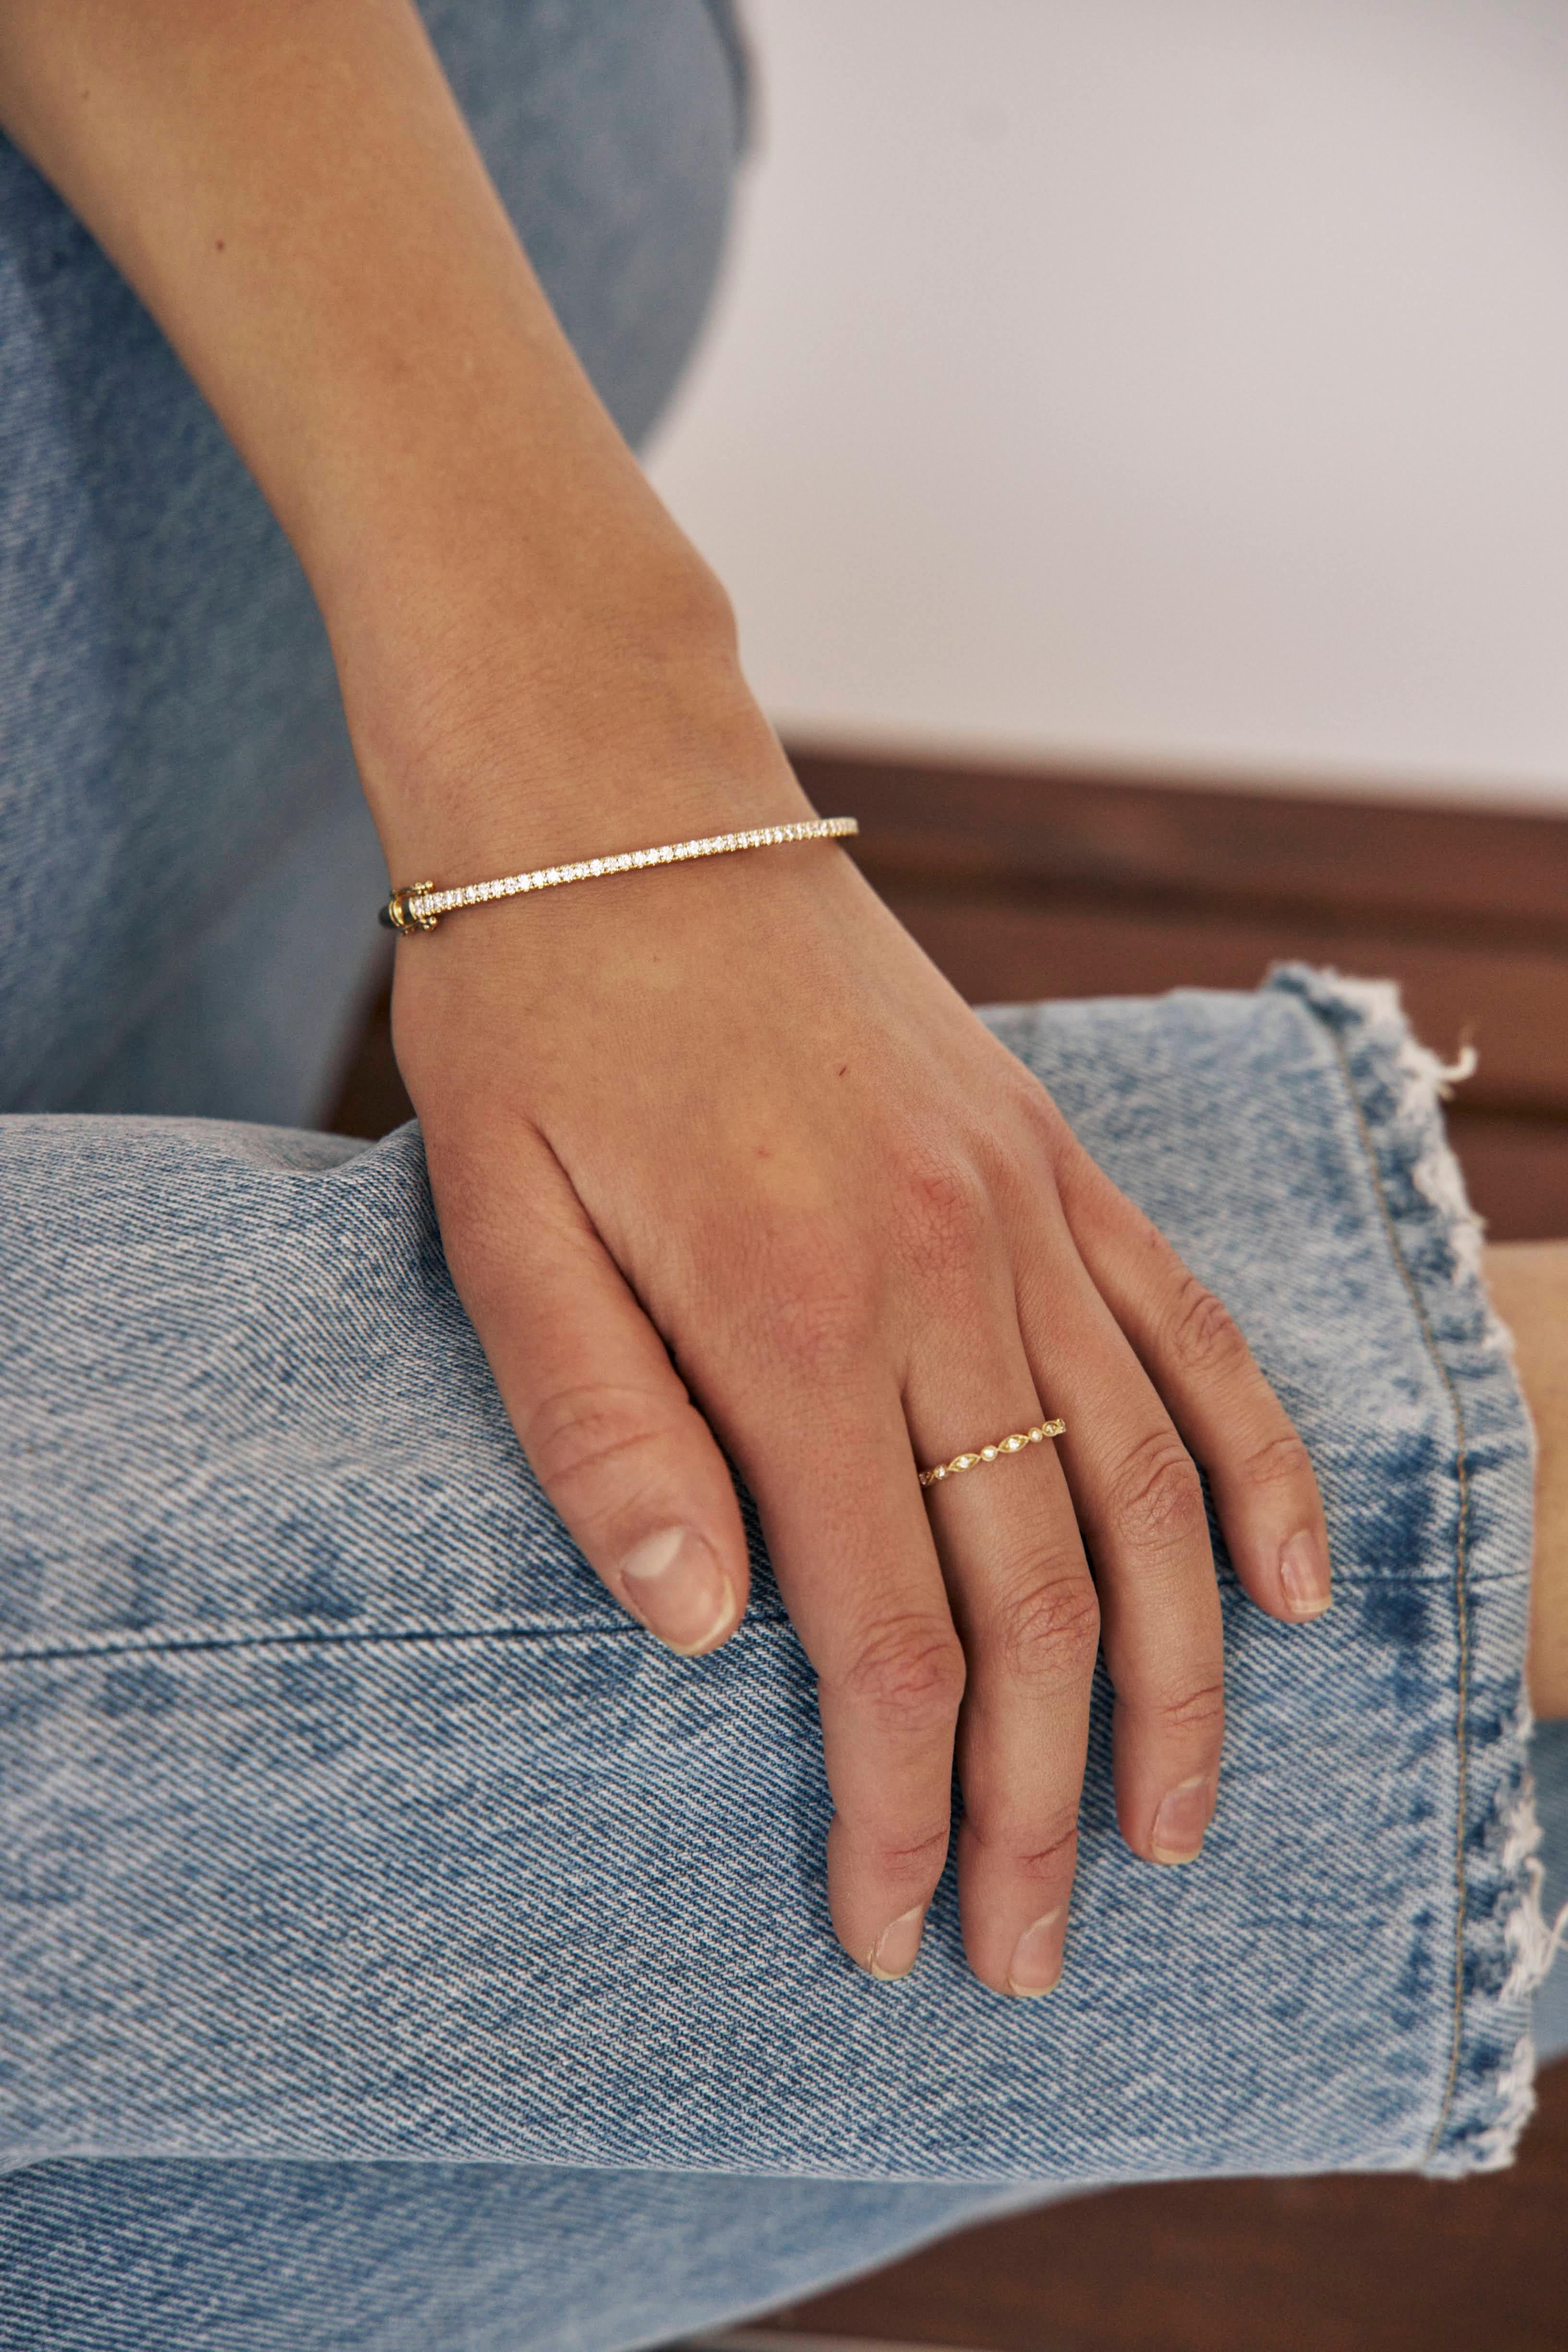 Timeless, elegant and sophisticated! A purchase you invest for a lifetime. The classic diamond bangle is a perfect look to wear alone or stack with your watch/other bracelets!

18kt Yellow Gold
Dimensions: 7